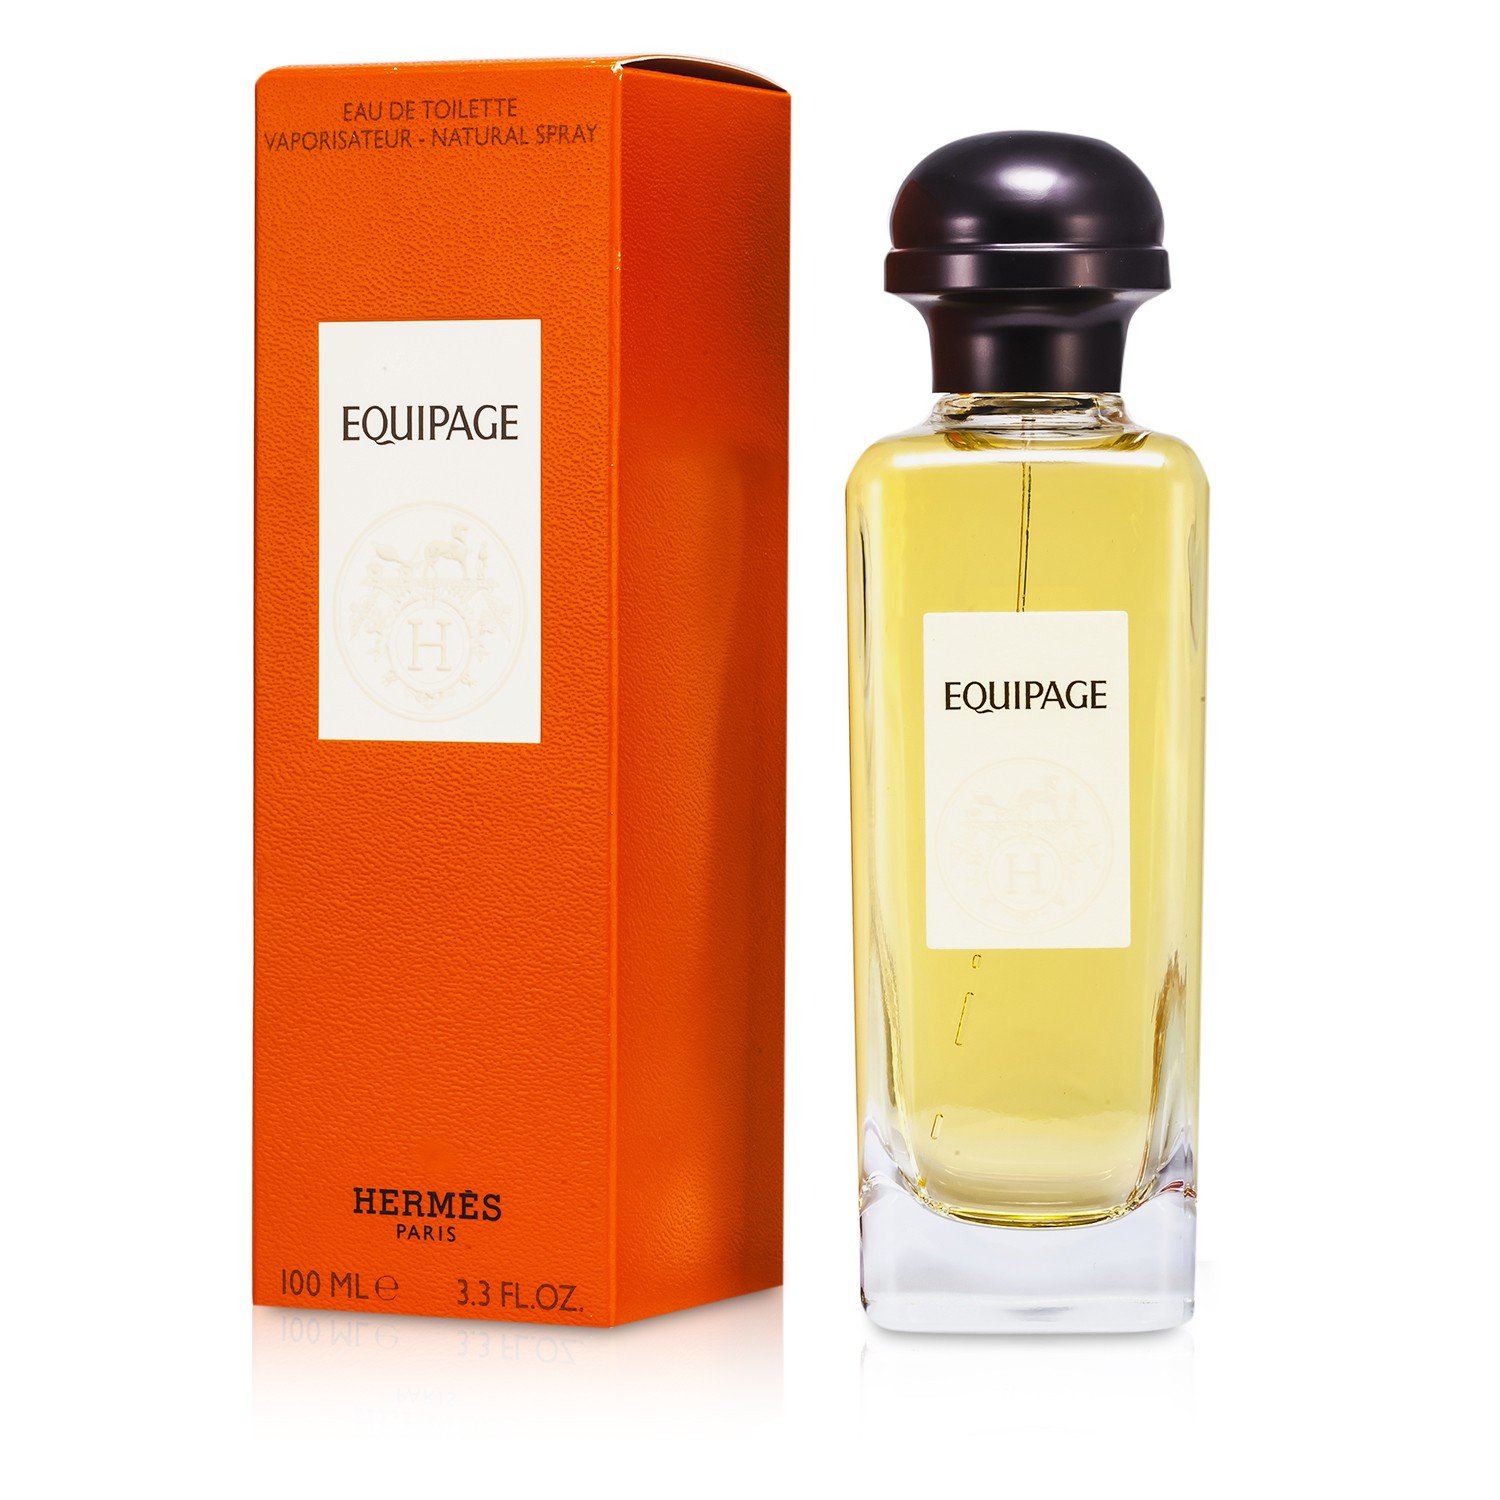 Hermes Equipage, edt 100ml